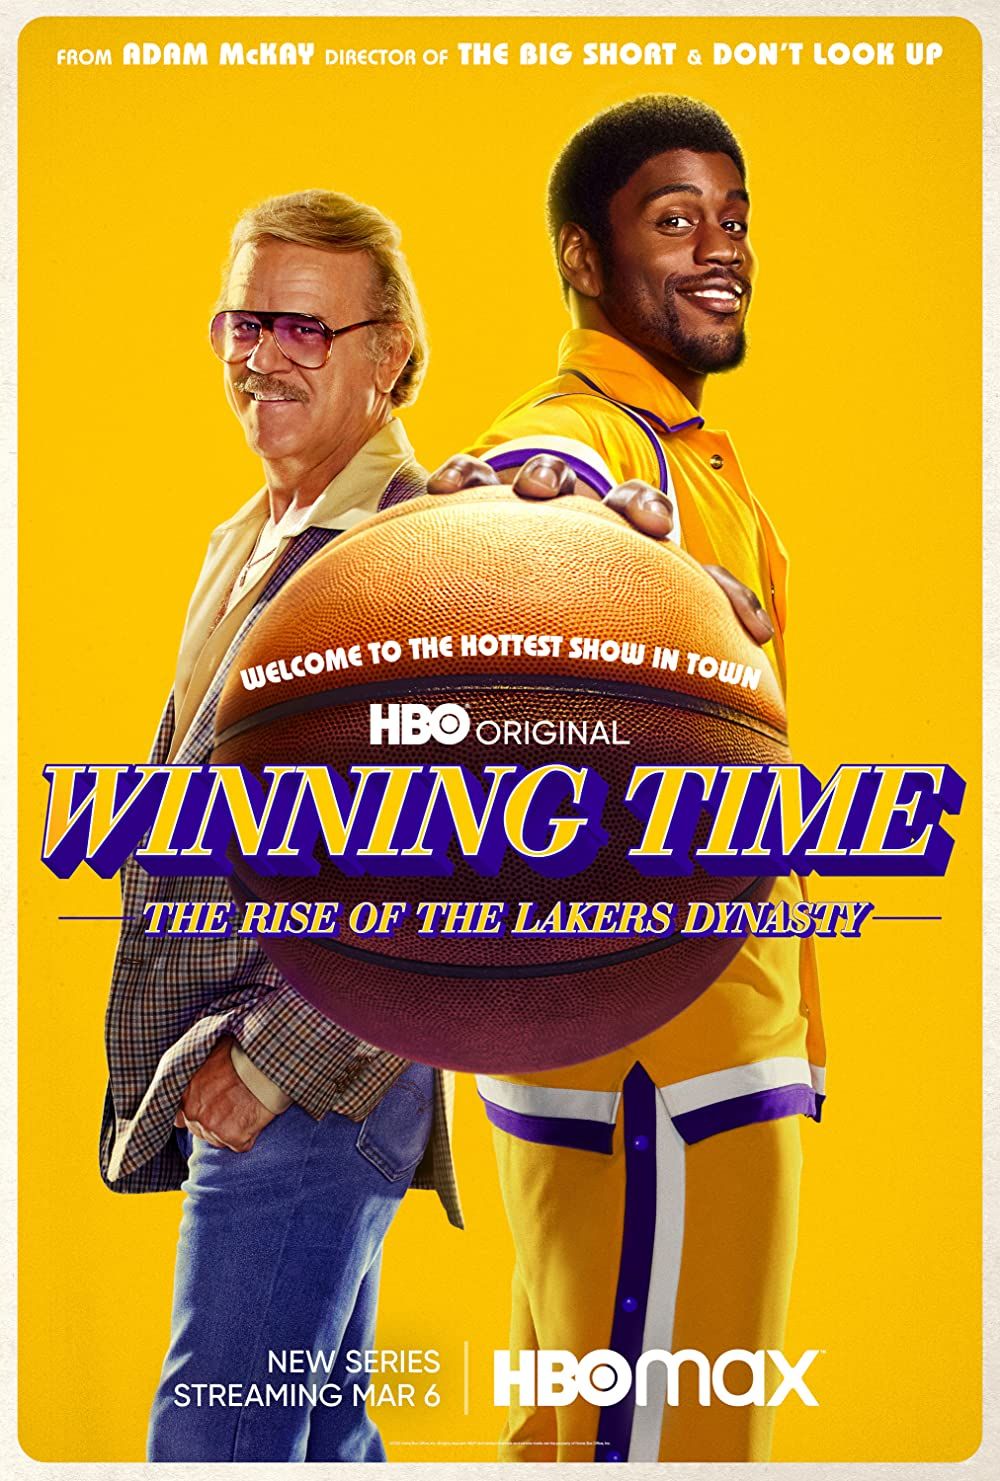 Ballislife - Then & Now: Showtime Lakers (1988, 2022) They